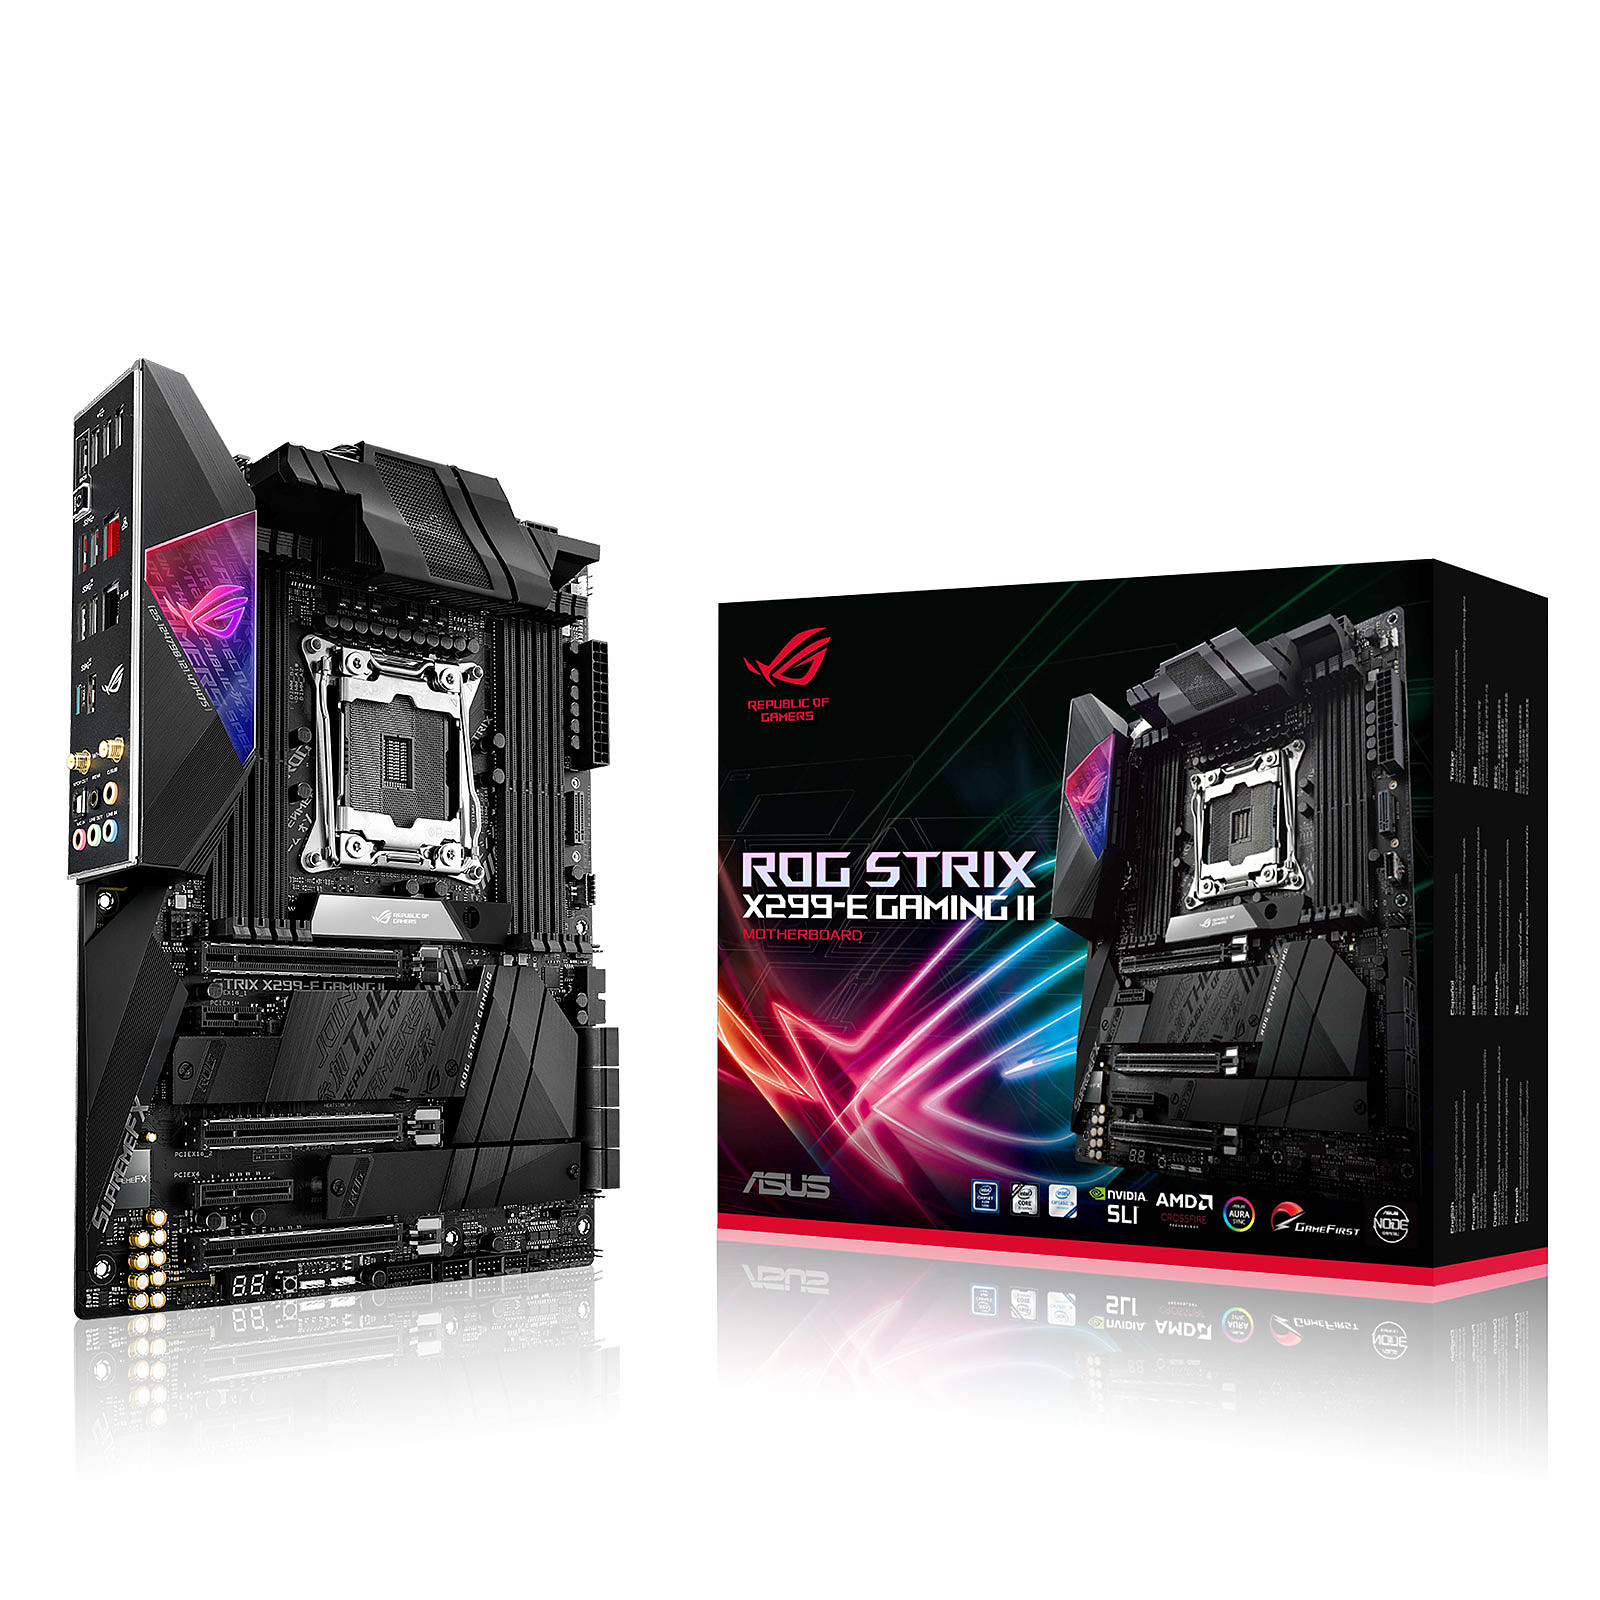 ASUS ROG STRIX X299-E GAMING II · Occasion - Carte mère ASUS - Occasion